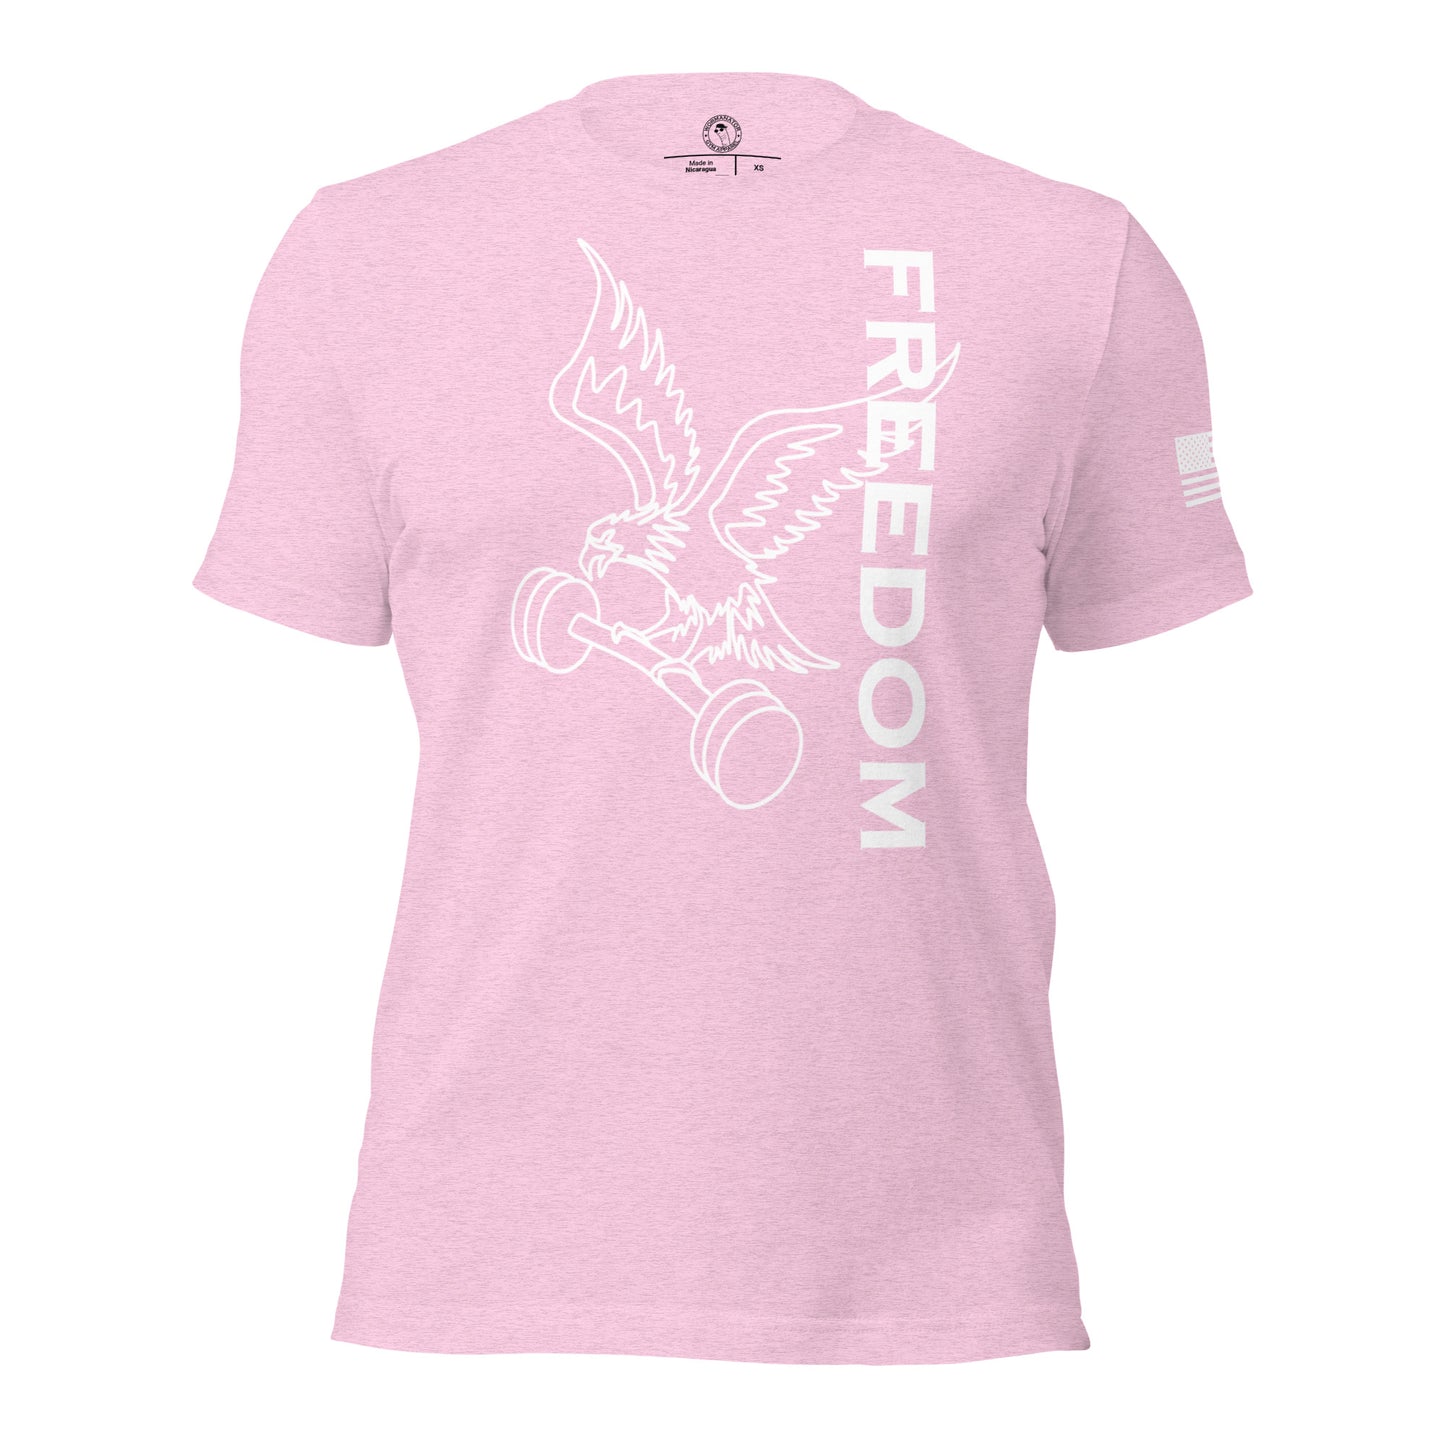 Reversed Freedom Eagle Barbell Shirt in Heather Prism Lilac